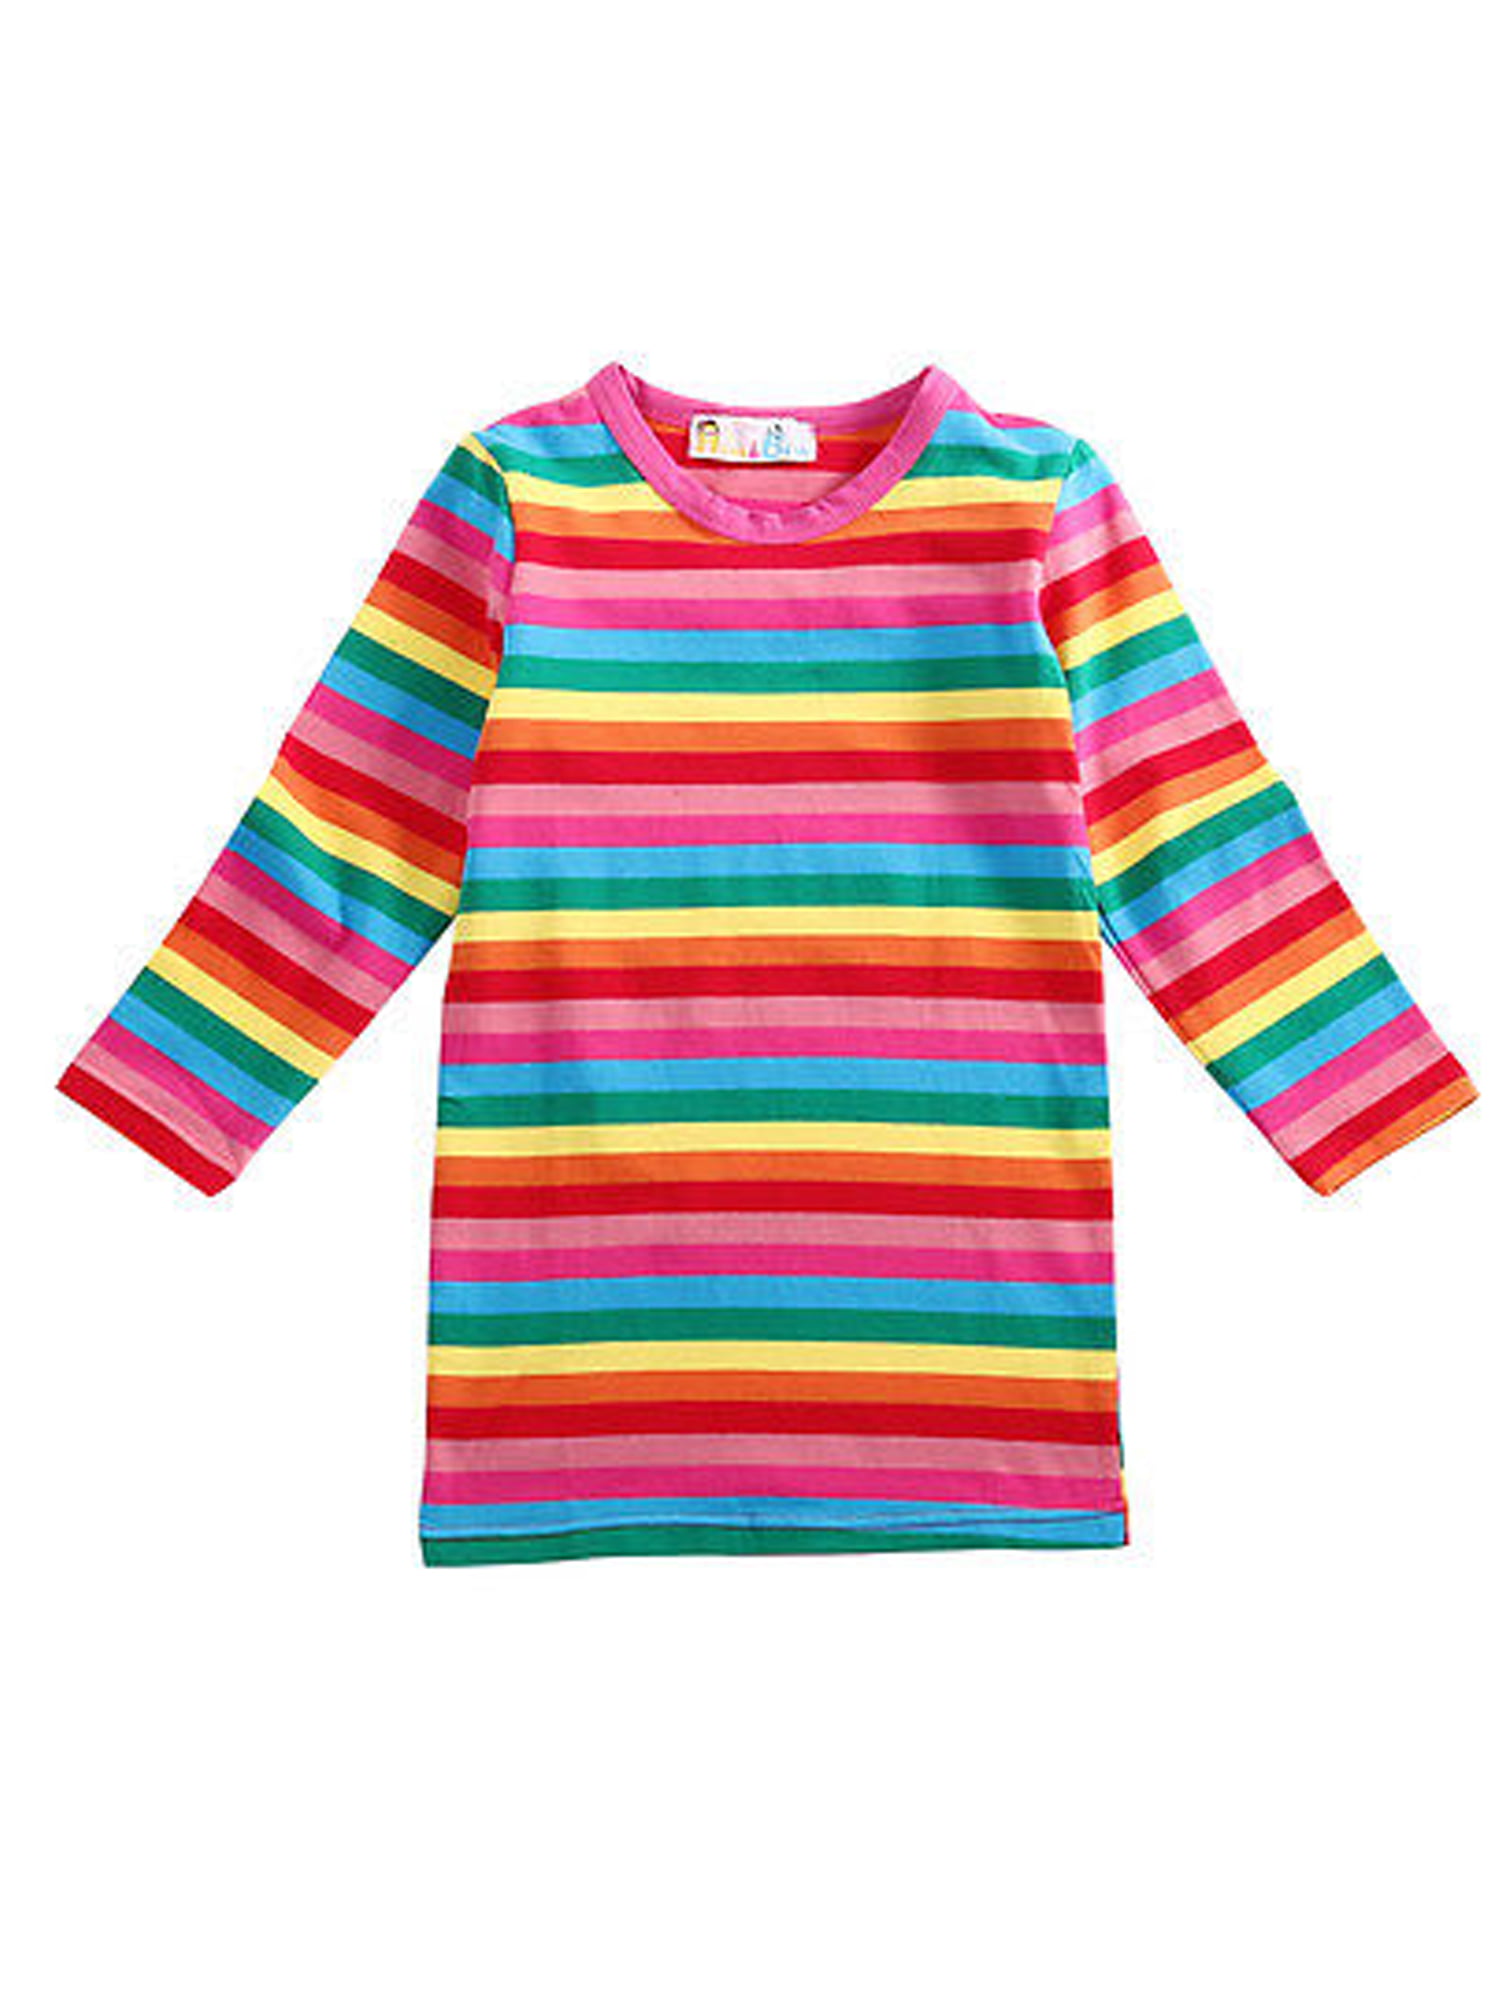 Size 6x Girls' Long Sleeve Yellow Striped Rib-Knit T-Shirt-NEW WITH TAGS! 